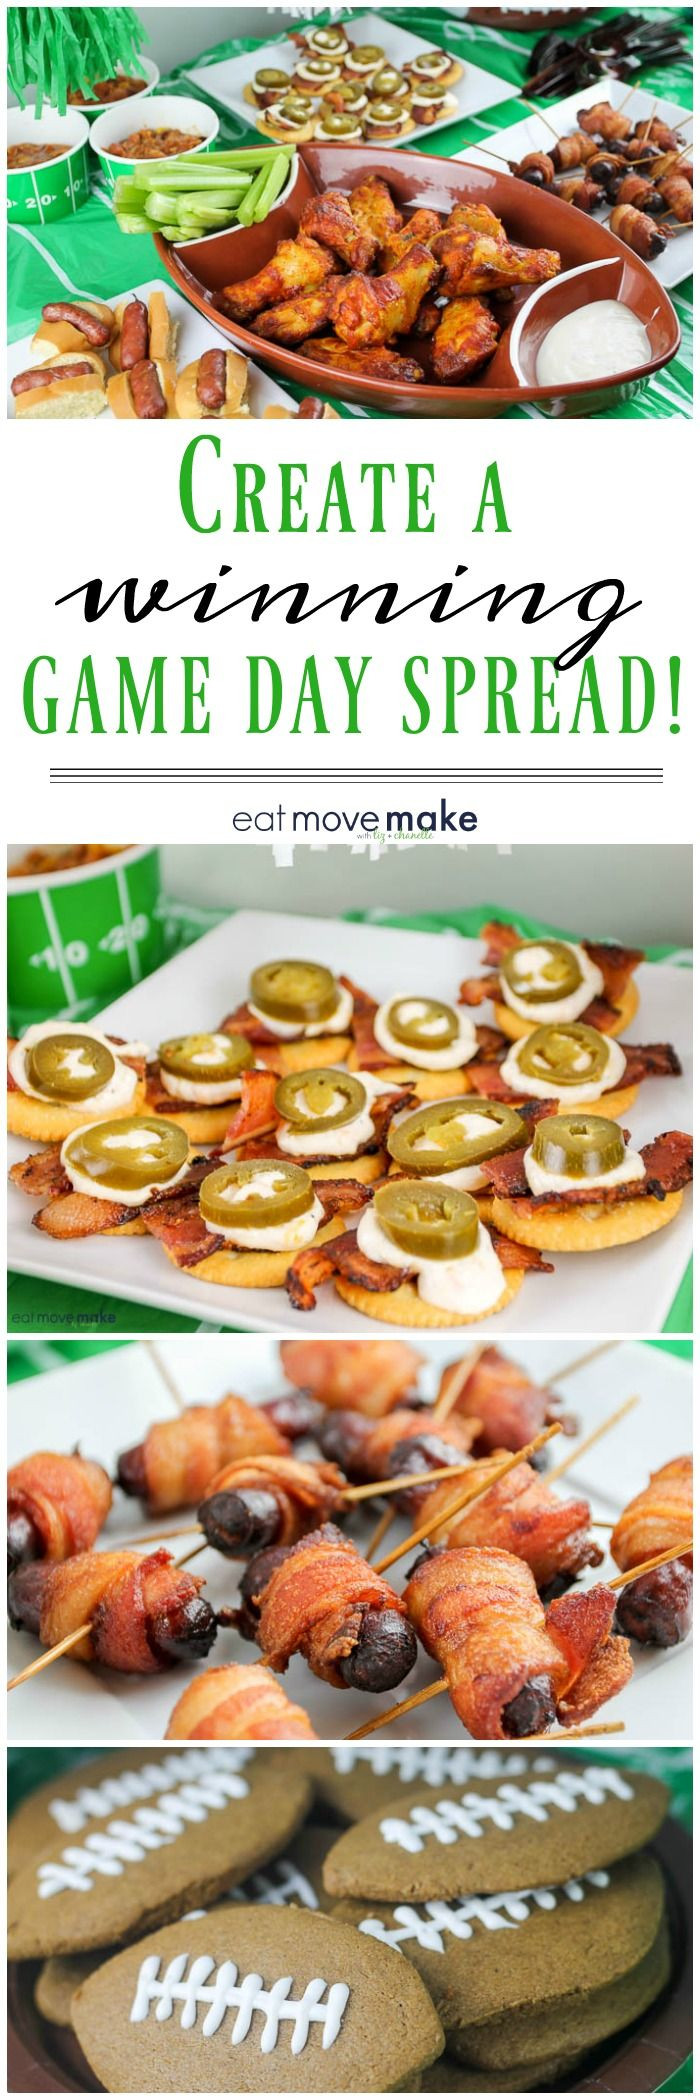 Football Party Food Ideas For Adults
 Game day snacks appetizers dip and easy food for